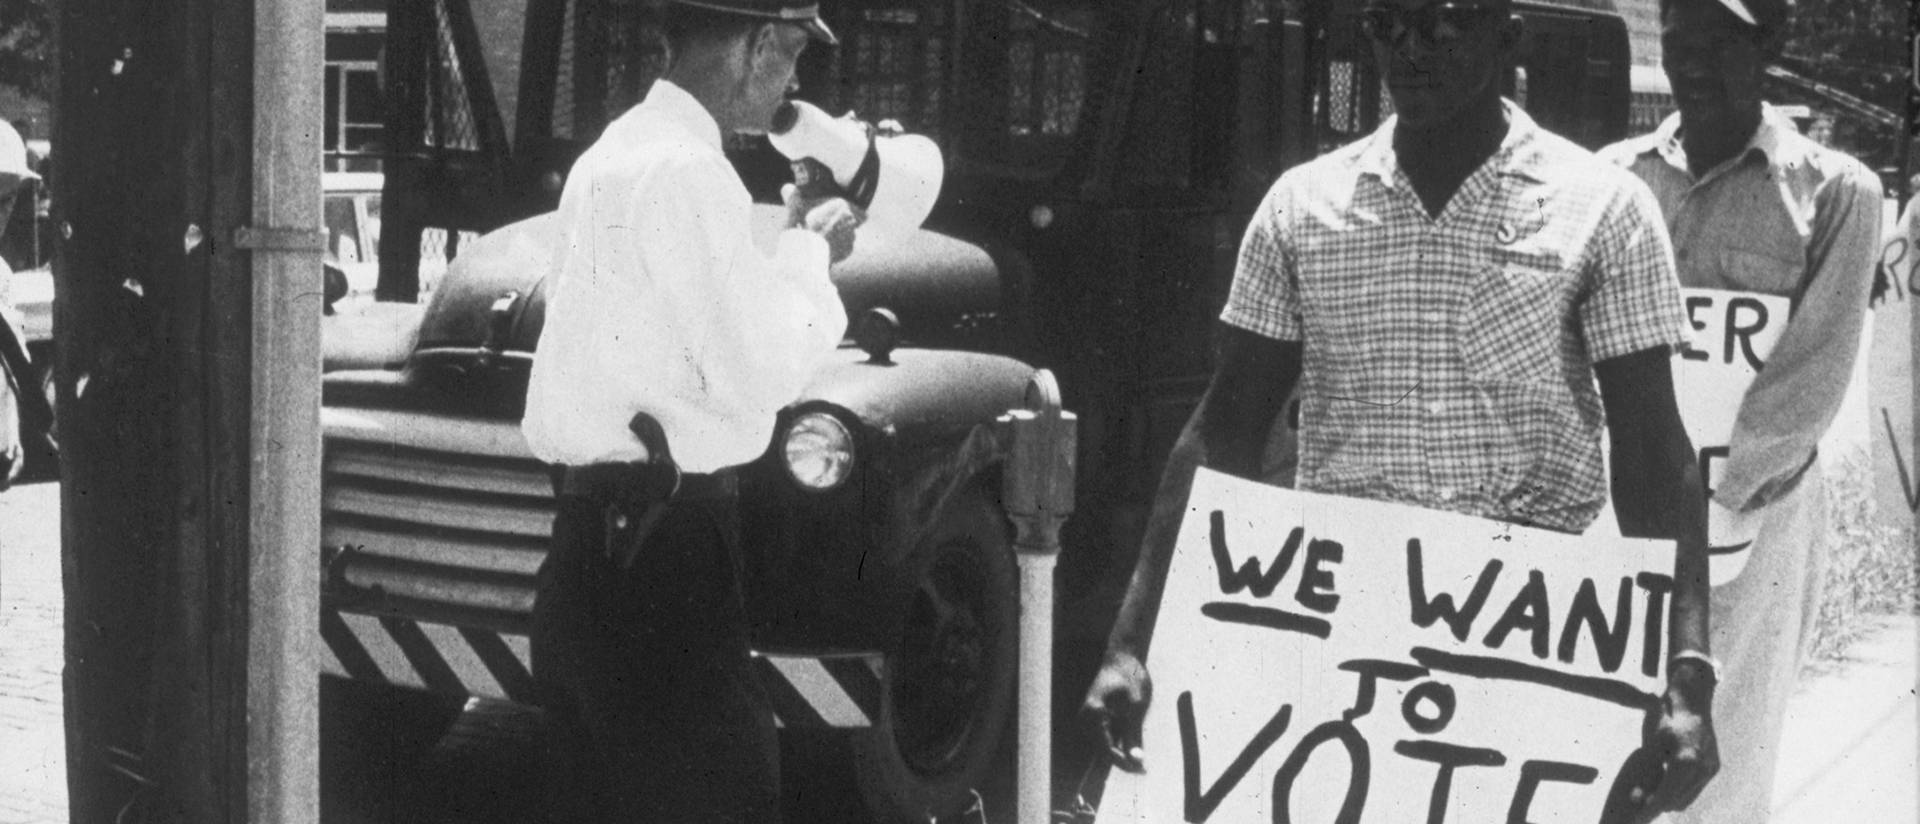 Historical photo from civil rights era, voting rights sign